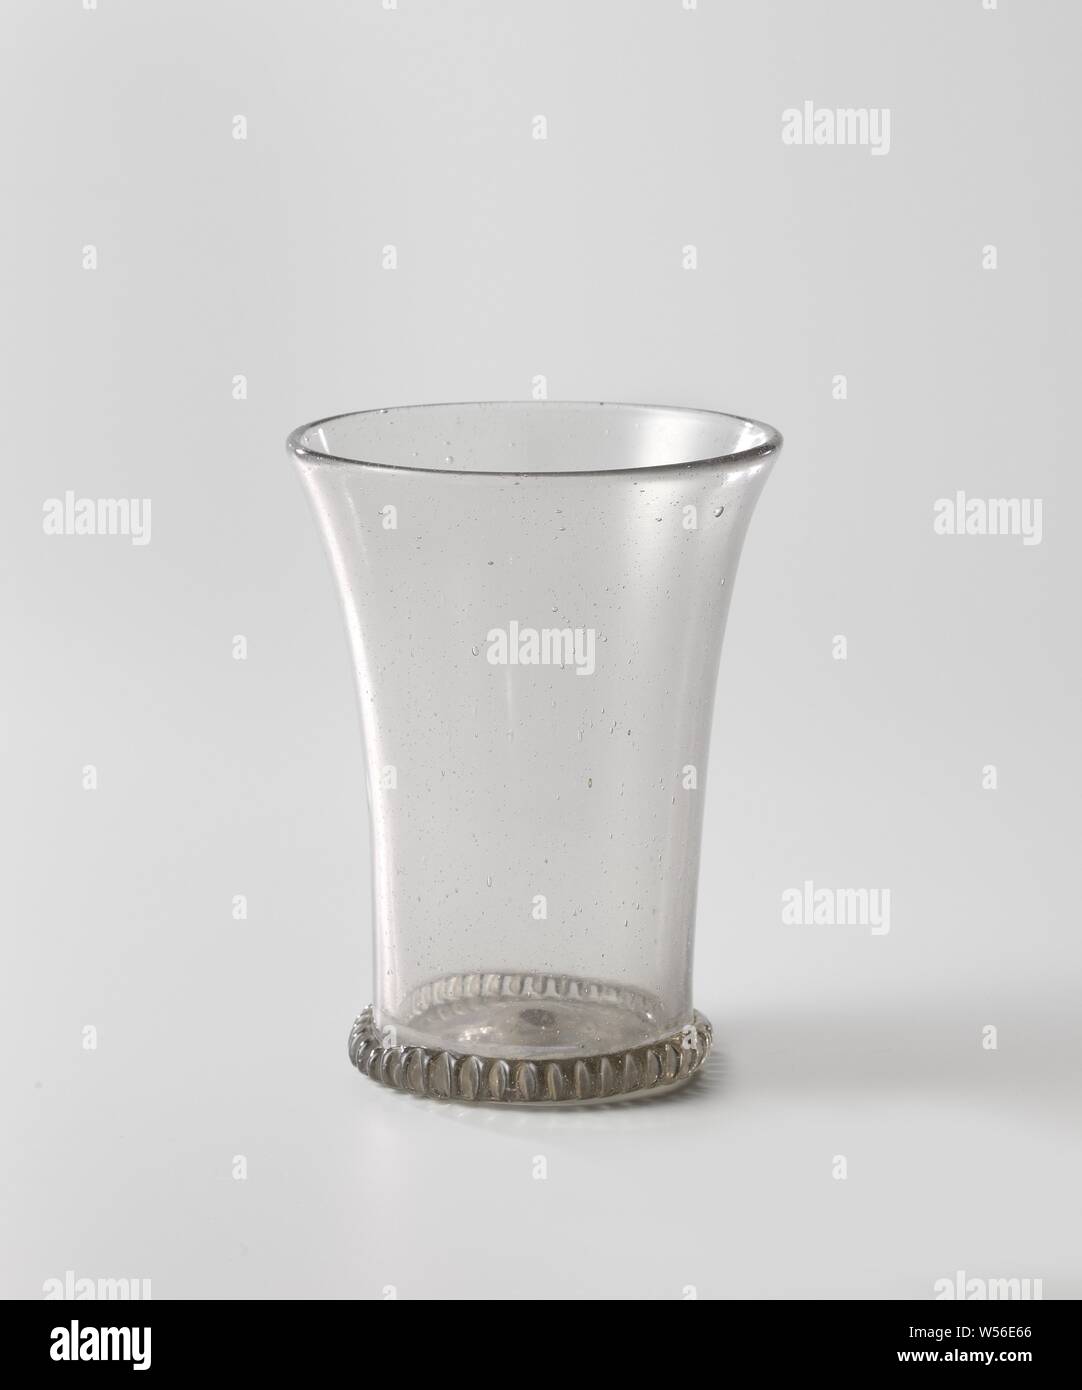 https://c8.alamy.com/comp/W56E66/cup-cup-with-slightly-inserted-bottom-ribbed-stand-ring-cup-shaped-widening-body-anonymous-nederlanden-c-1550-c-1600-glass-glassblowing-h-106-cm-d-82-cm-W56E66.jpg